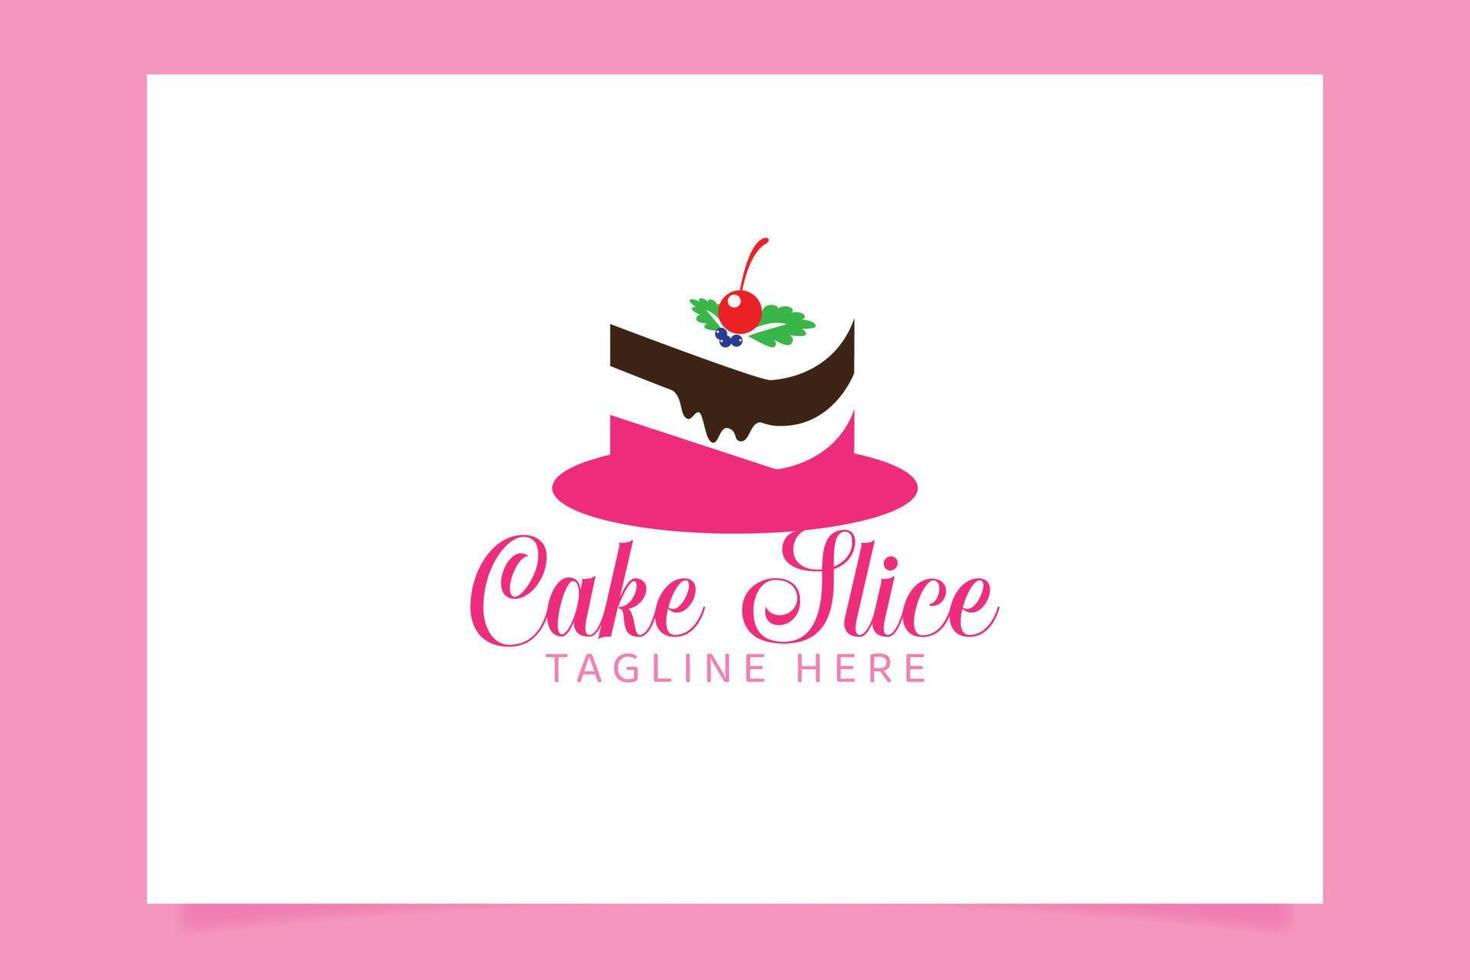 Cake slice logo with beautiful cake slice images decorated with cherry and mint leaves for any businesses, especially for bakery, cakery, cake art, cake school, etc. vector